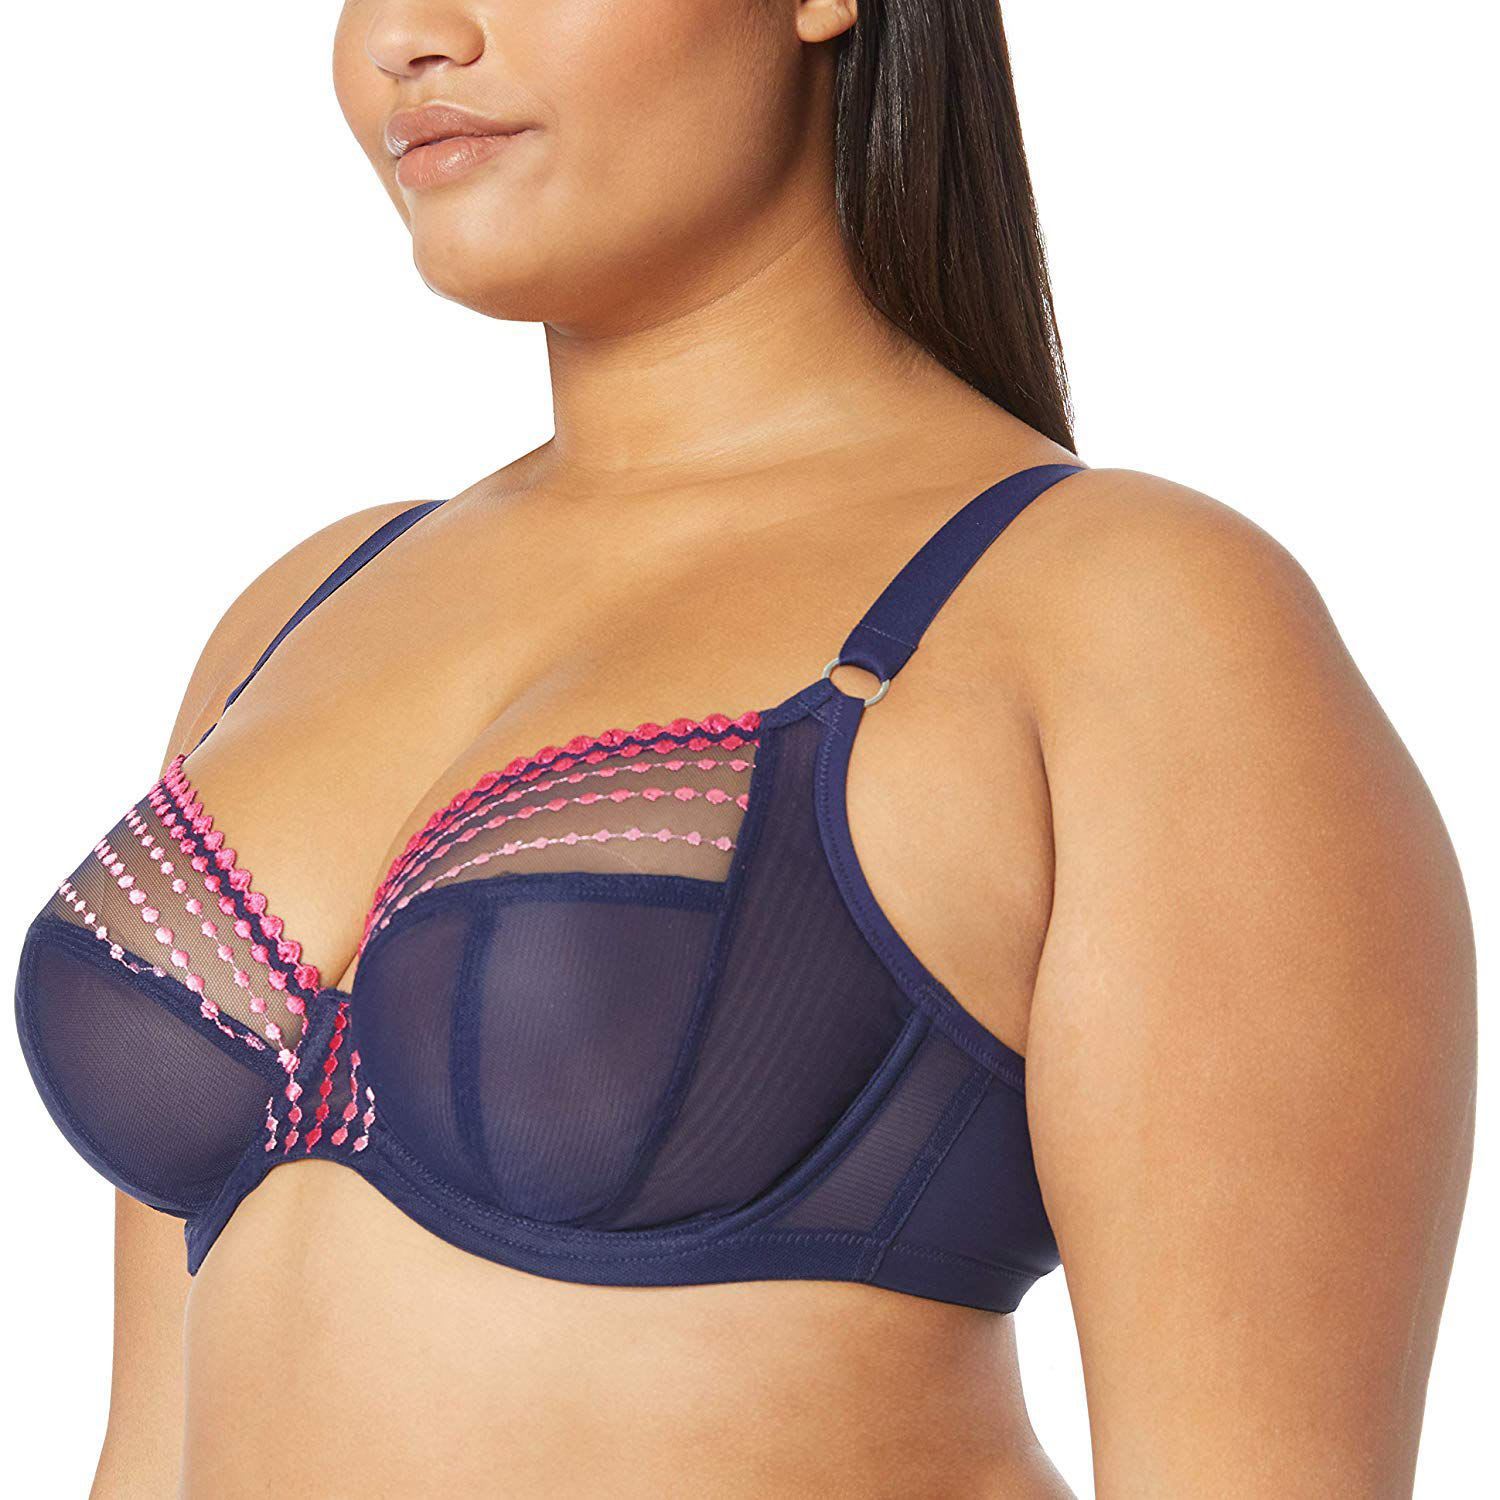 The Results Are In: These Are the Best Bras for Big Boobs (According to Reviews)